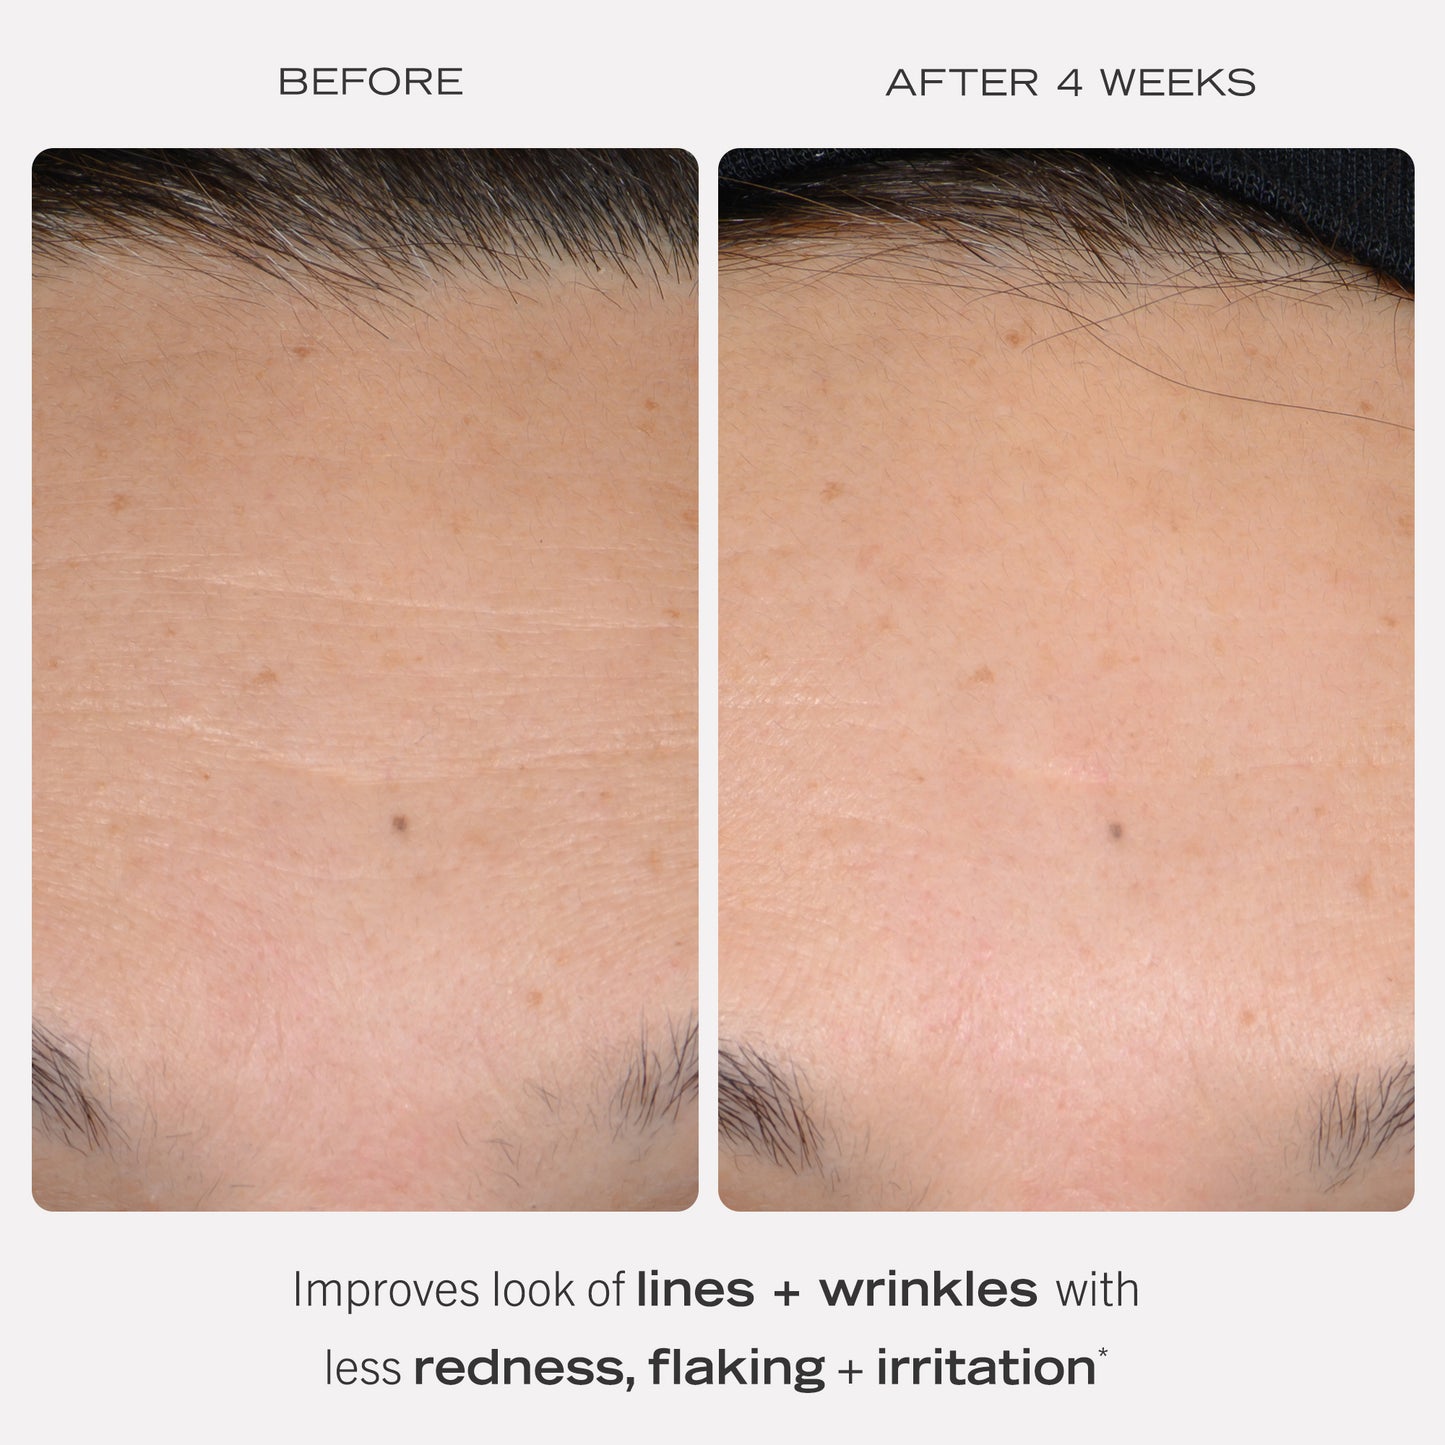 Face Before and After 4 Weeks of using Retinol. Improves look of lines + wrinkles with less redness, flaking + irritation